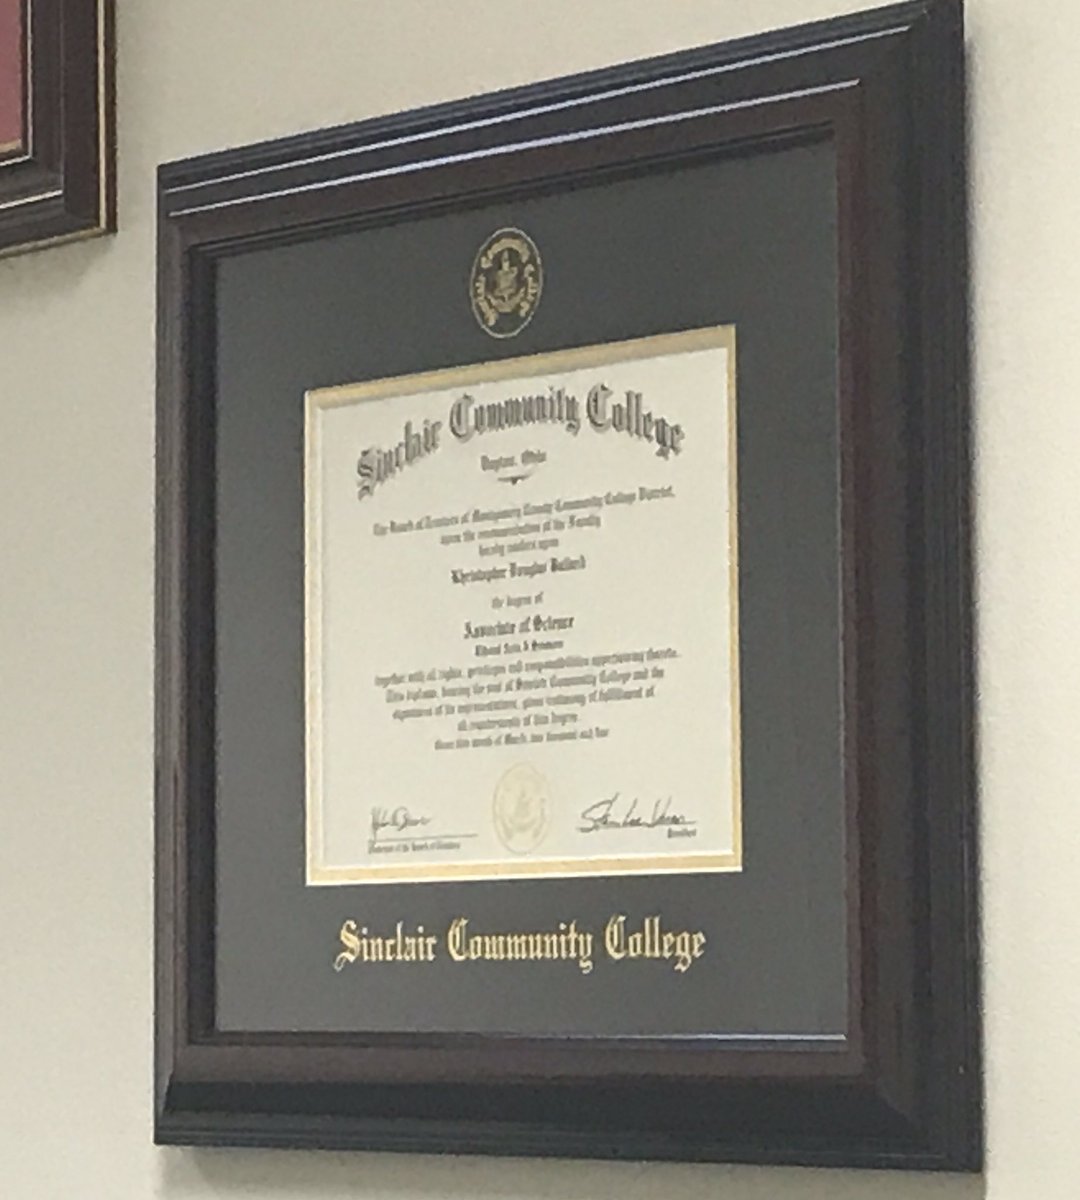 When visiting my optometrist today, I was glad to see that his journey started at a community college...and that he proudly displays his diploma right alongside his others! #endccstigma @SinclairCC